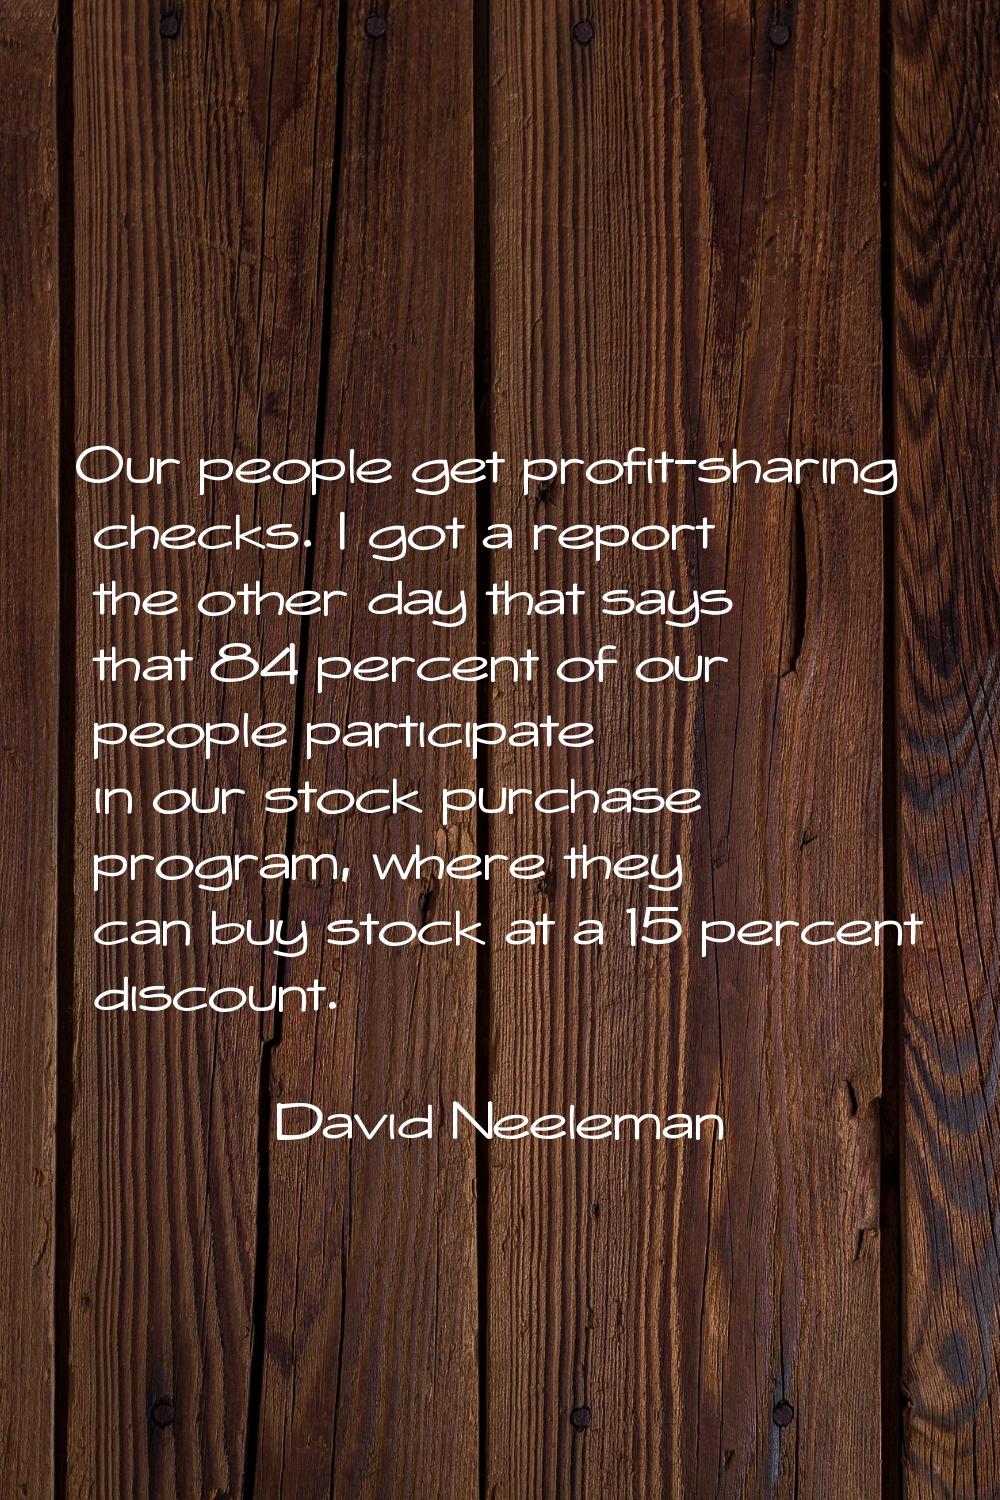 Our people get profit-sharing checks. I got a report the other day that says that 84 percent of our